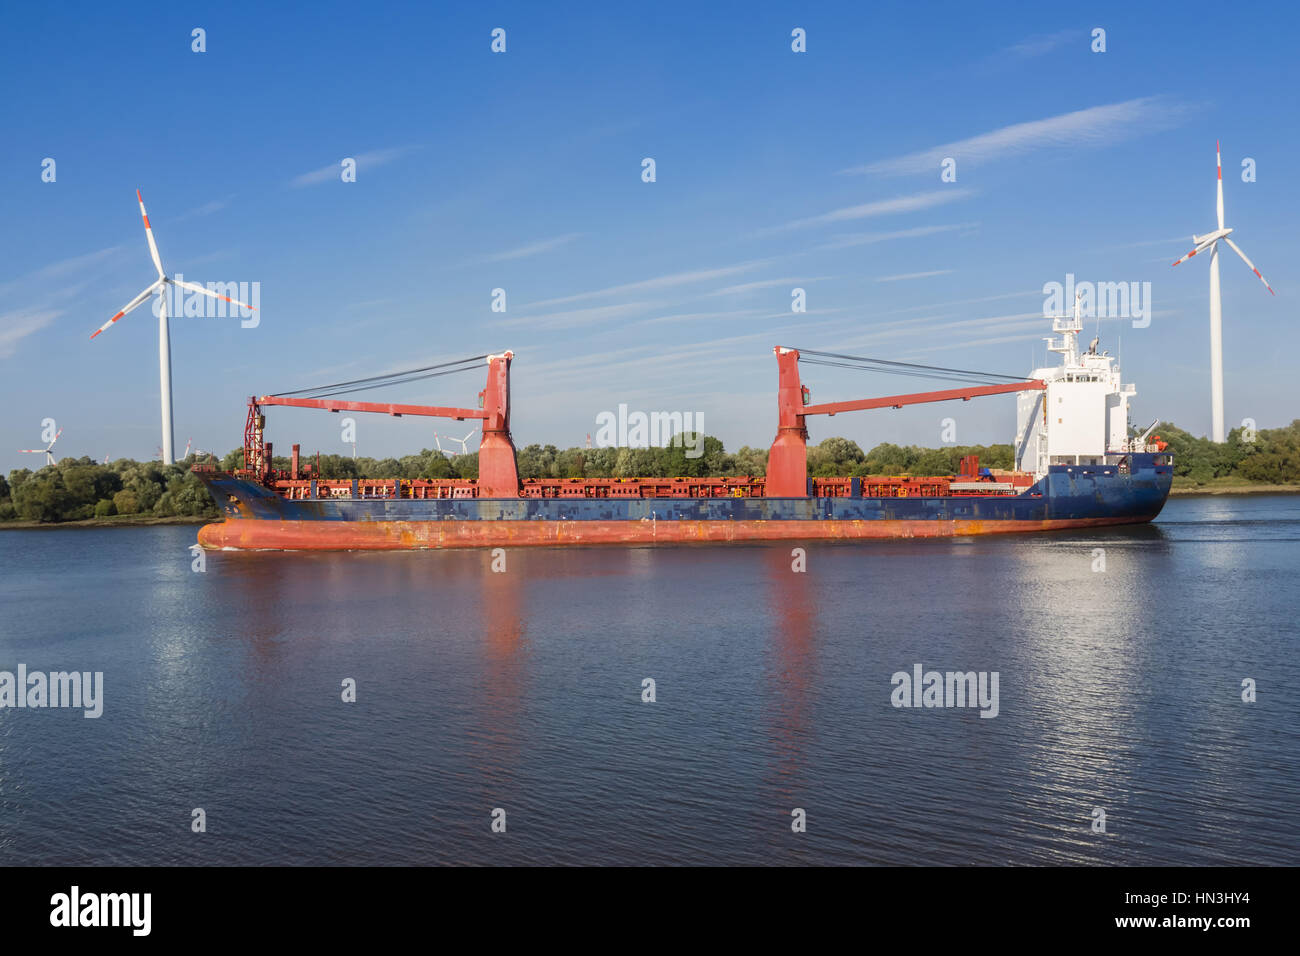 Freight ship on a river between two wind turbines Stock Photo